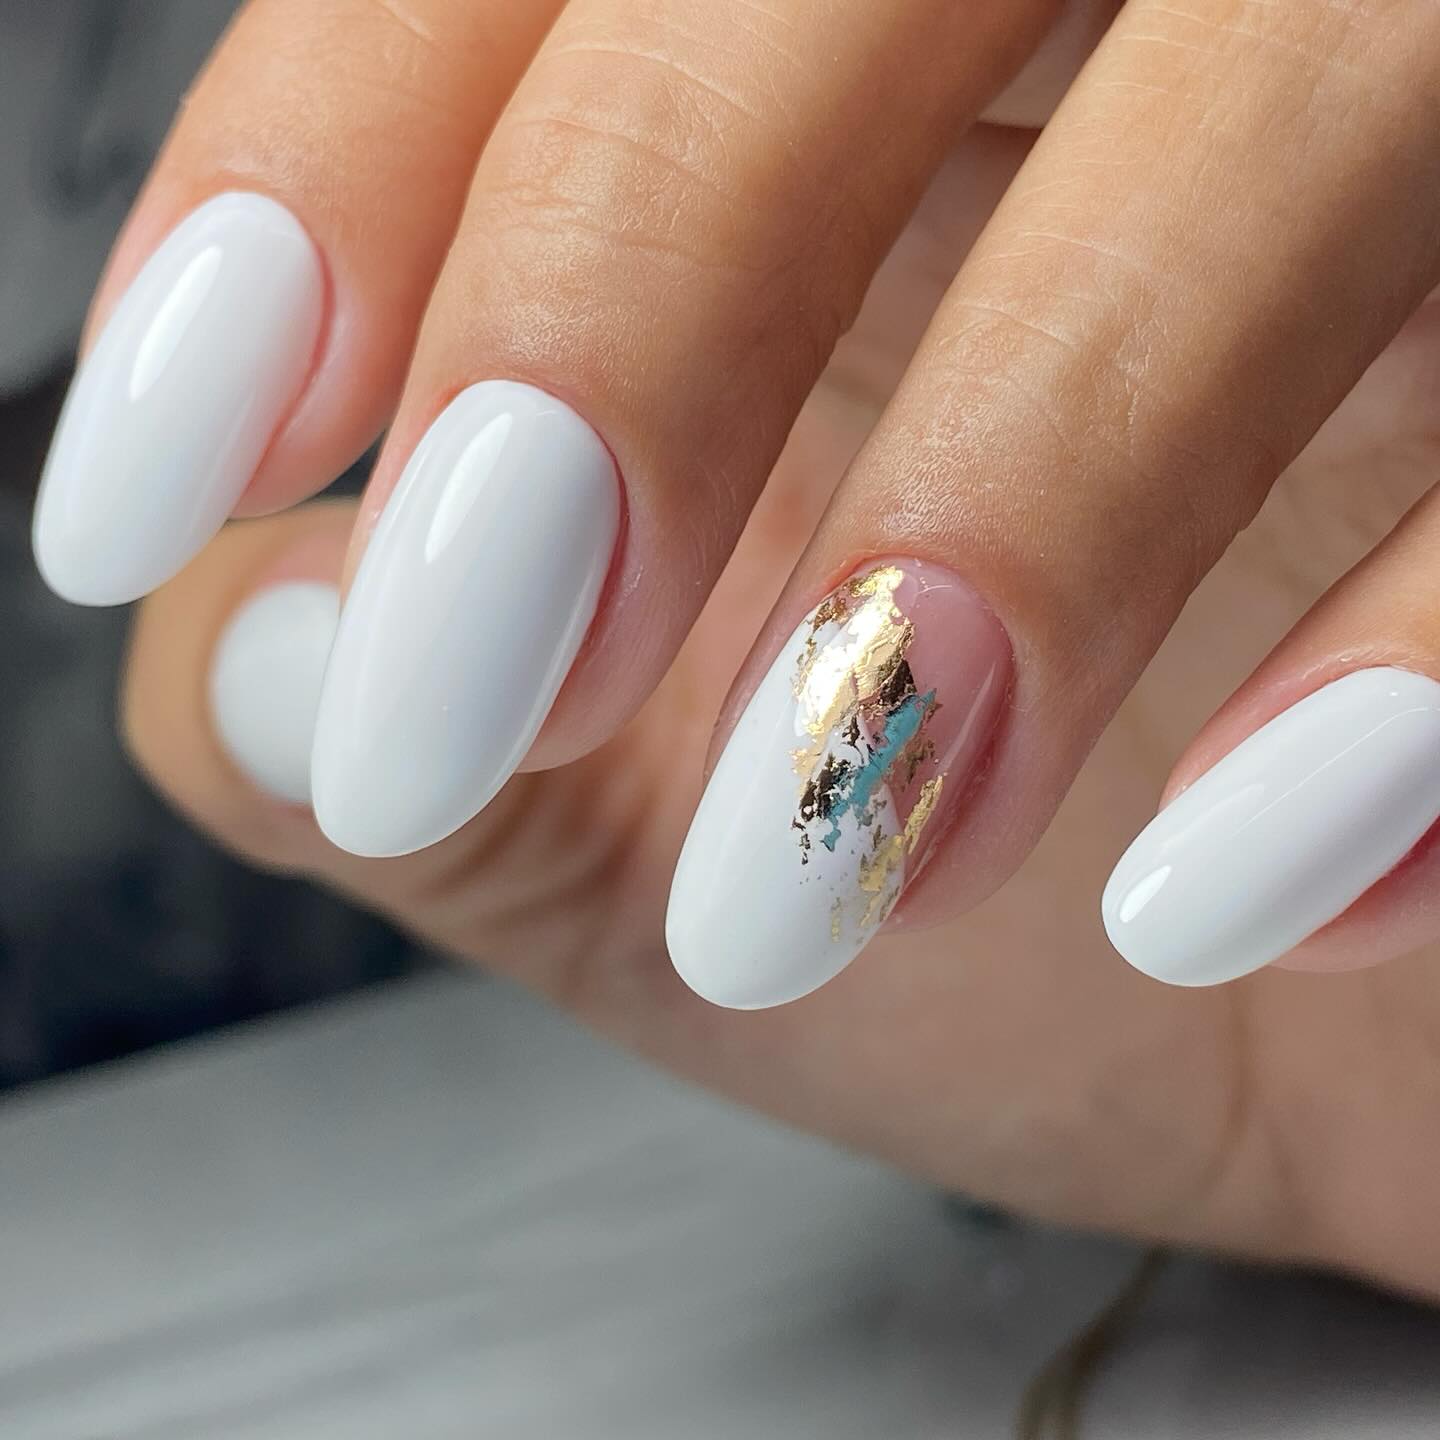 100 Pretty Spring Nail Designs To Try This Year images 101